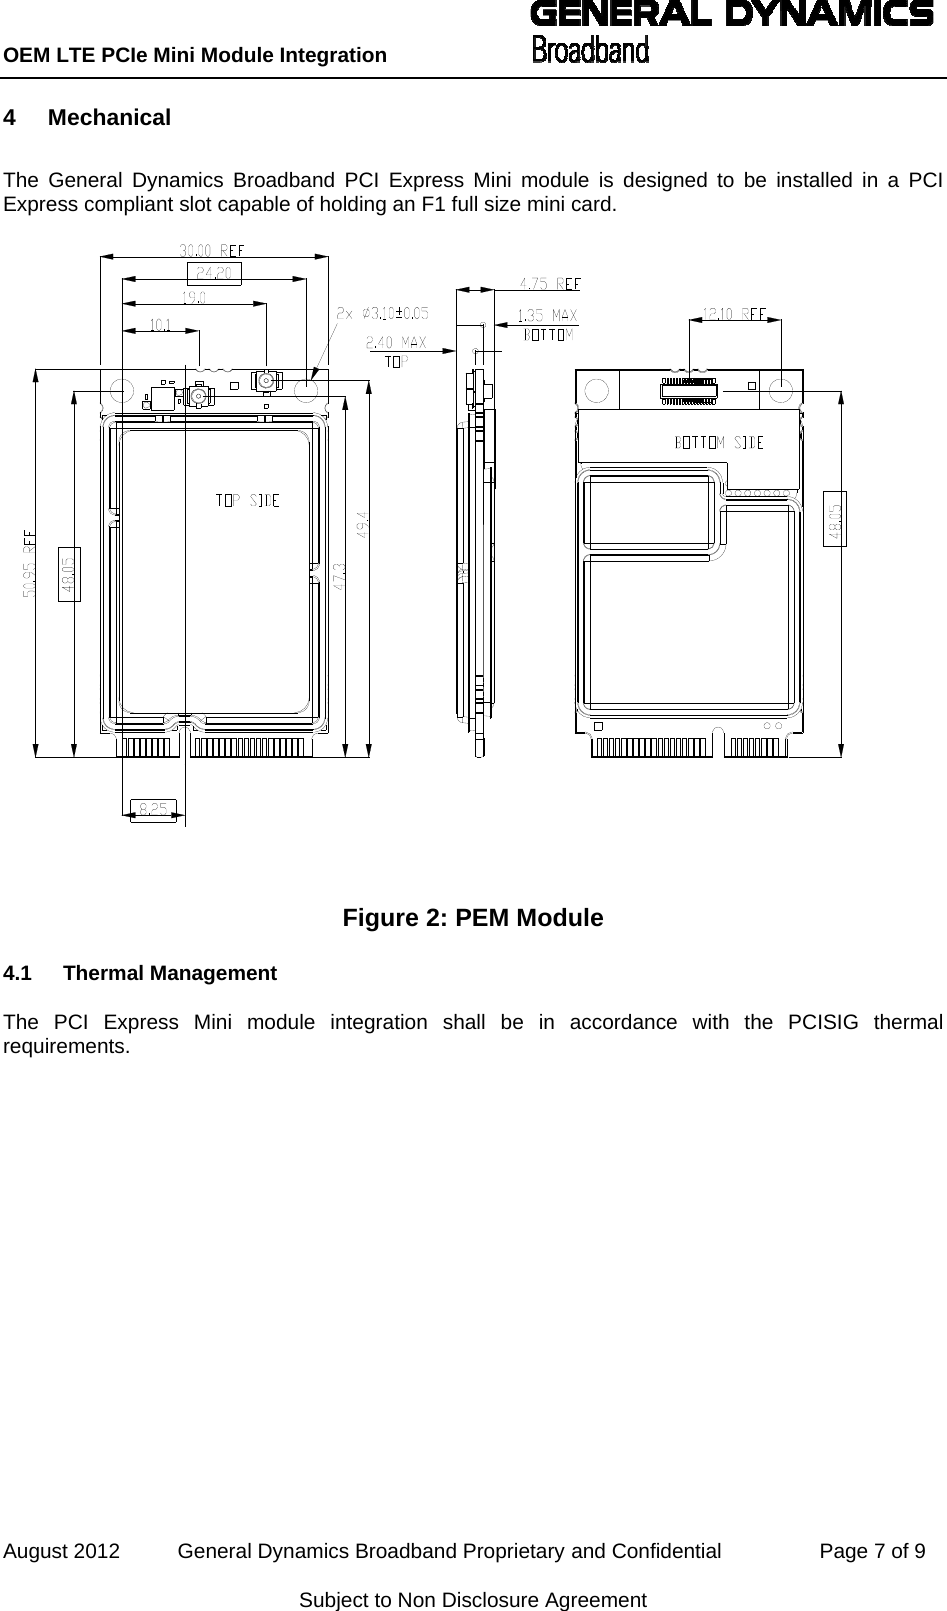 OEM LTE PCIe Mini Module Integration           August 2012          General Dynamics Broadband Proprietary and Confidential                 Page 7 of 9 Subject to Non Disclosure Agreement 4 Mechanical The General Dynamics Broadband PCI Express Mini module is designed to be installed in a PCI Express compliant slot capable of holding an F1 full size mini card.  Figure 2: PEM Module 4.1 Thermal Management The PCI Express Mini module integration shall be in accordance with the PCISIG thermal requirements. 